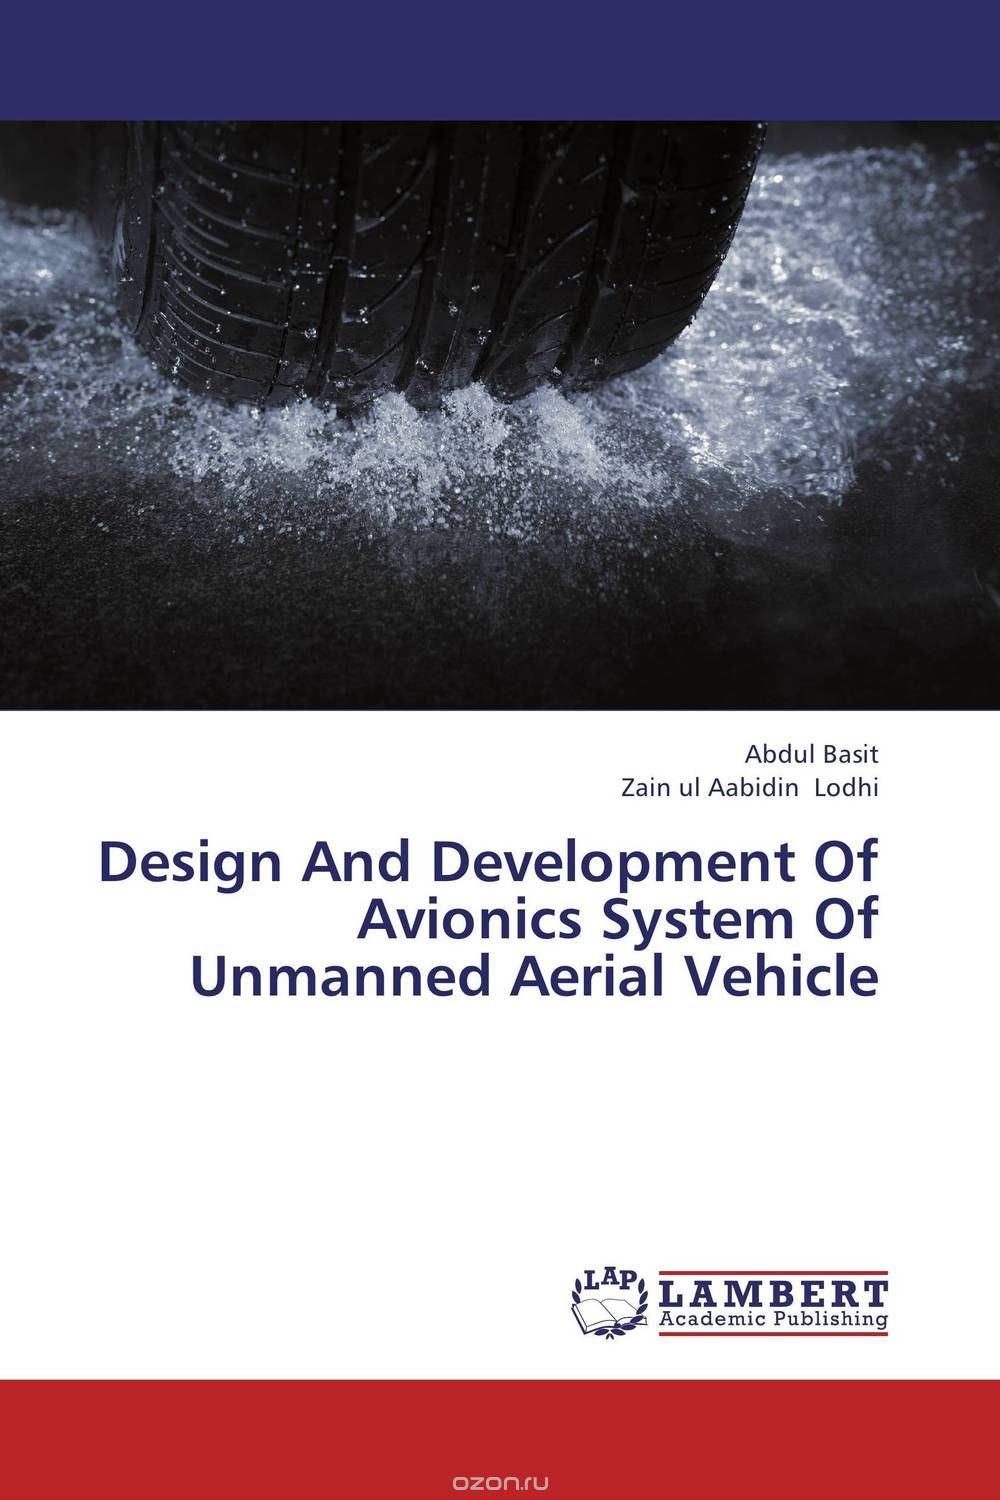 Design And Development Of Avionics System Of Unmanned Aerial Vehicle